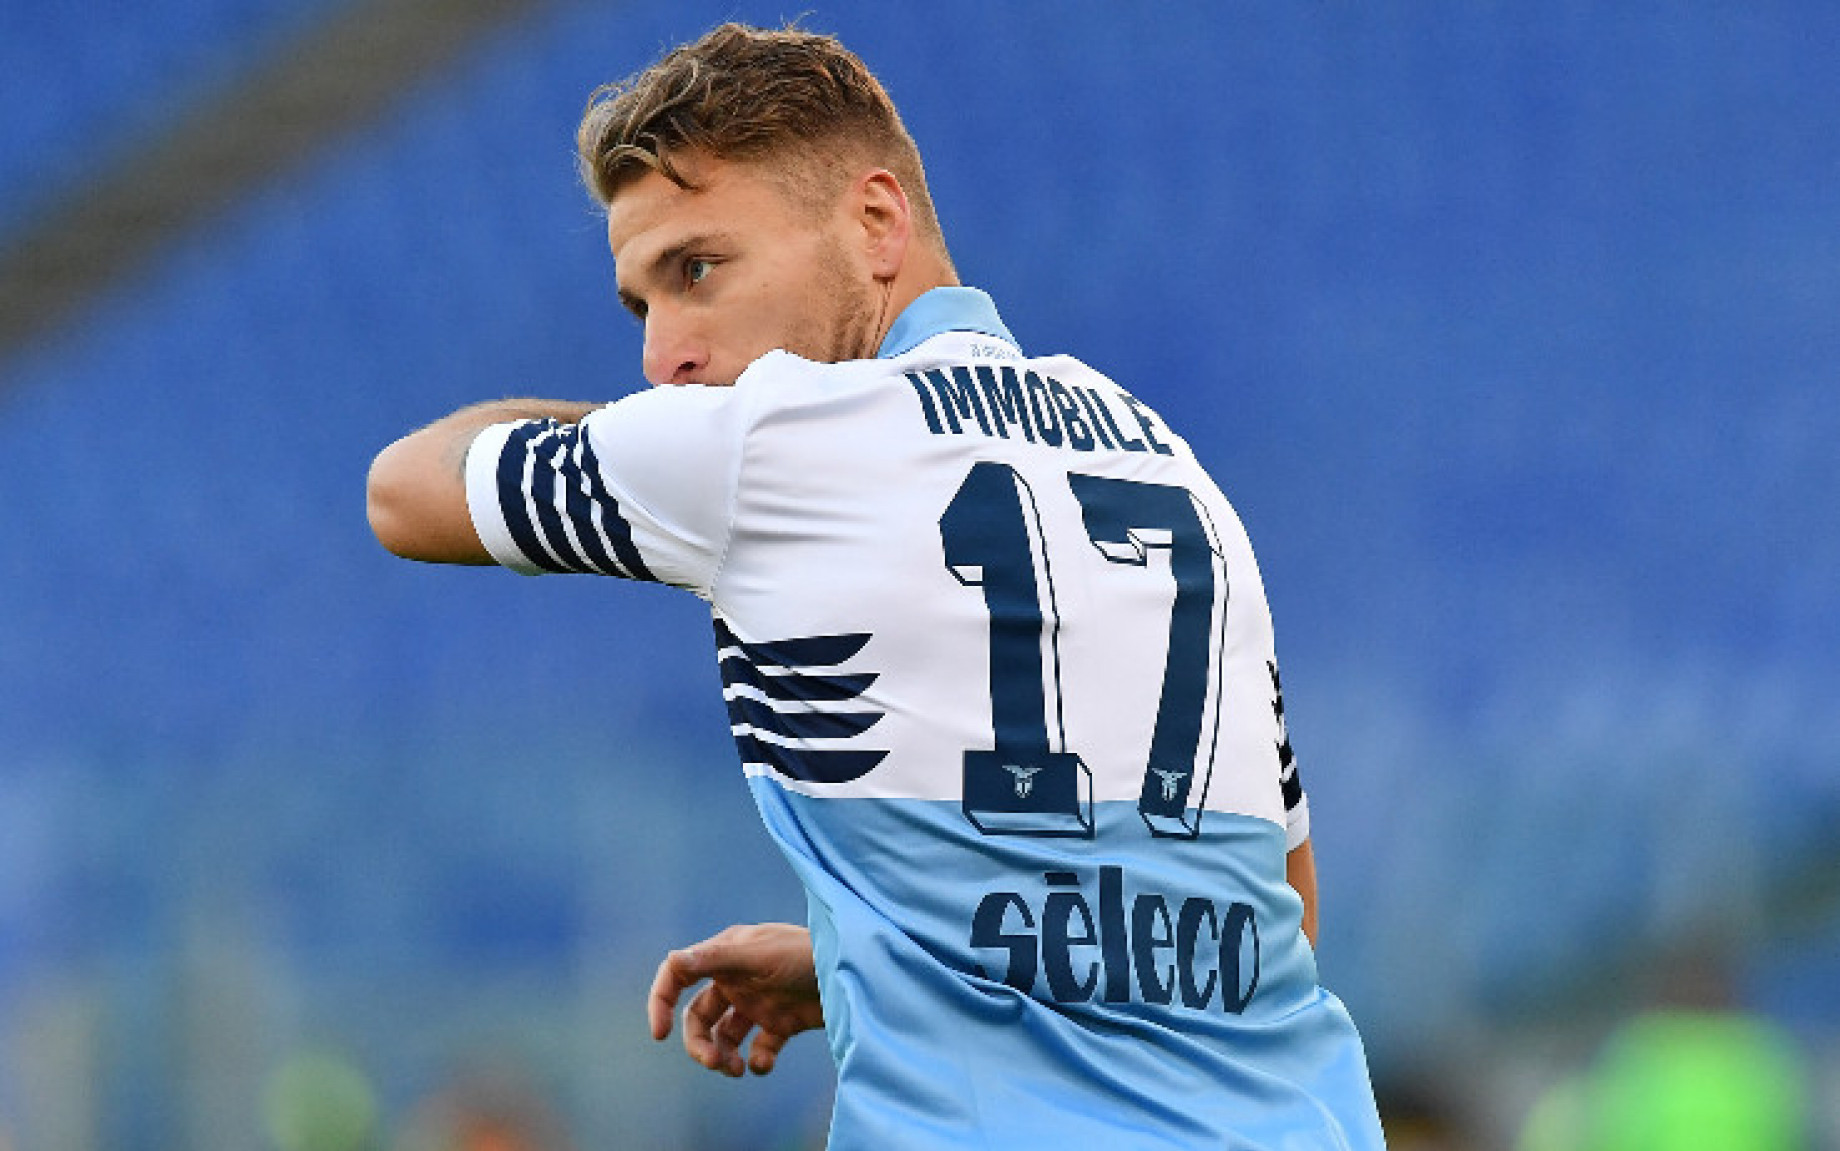 immobile_IMAGE x gallery fifa.jpg